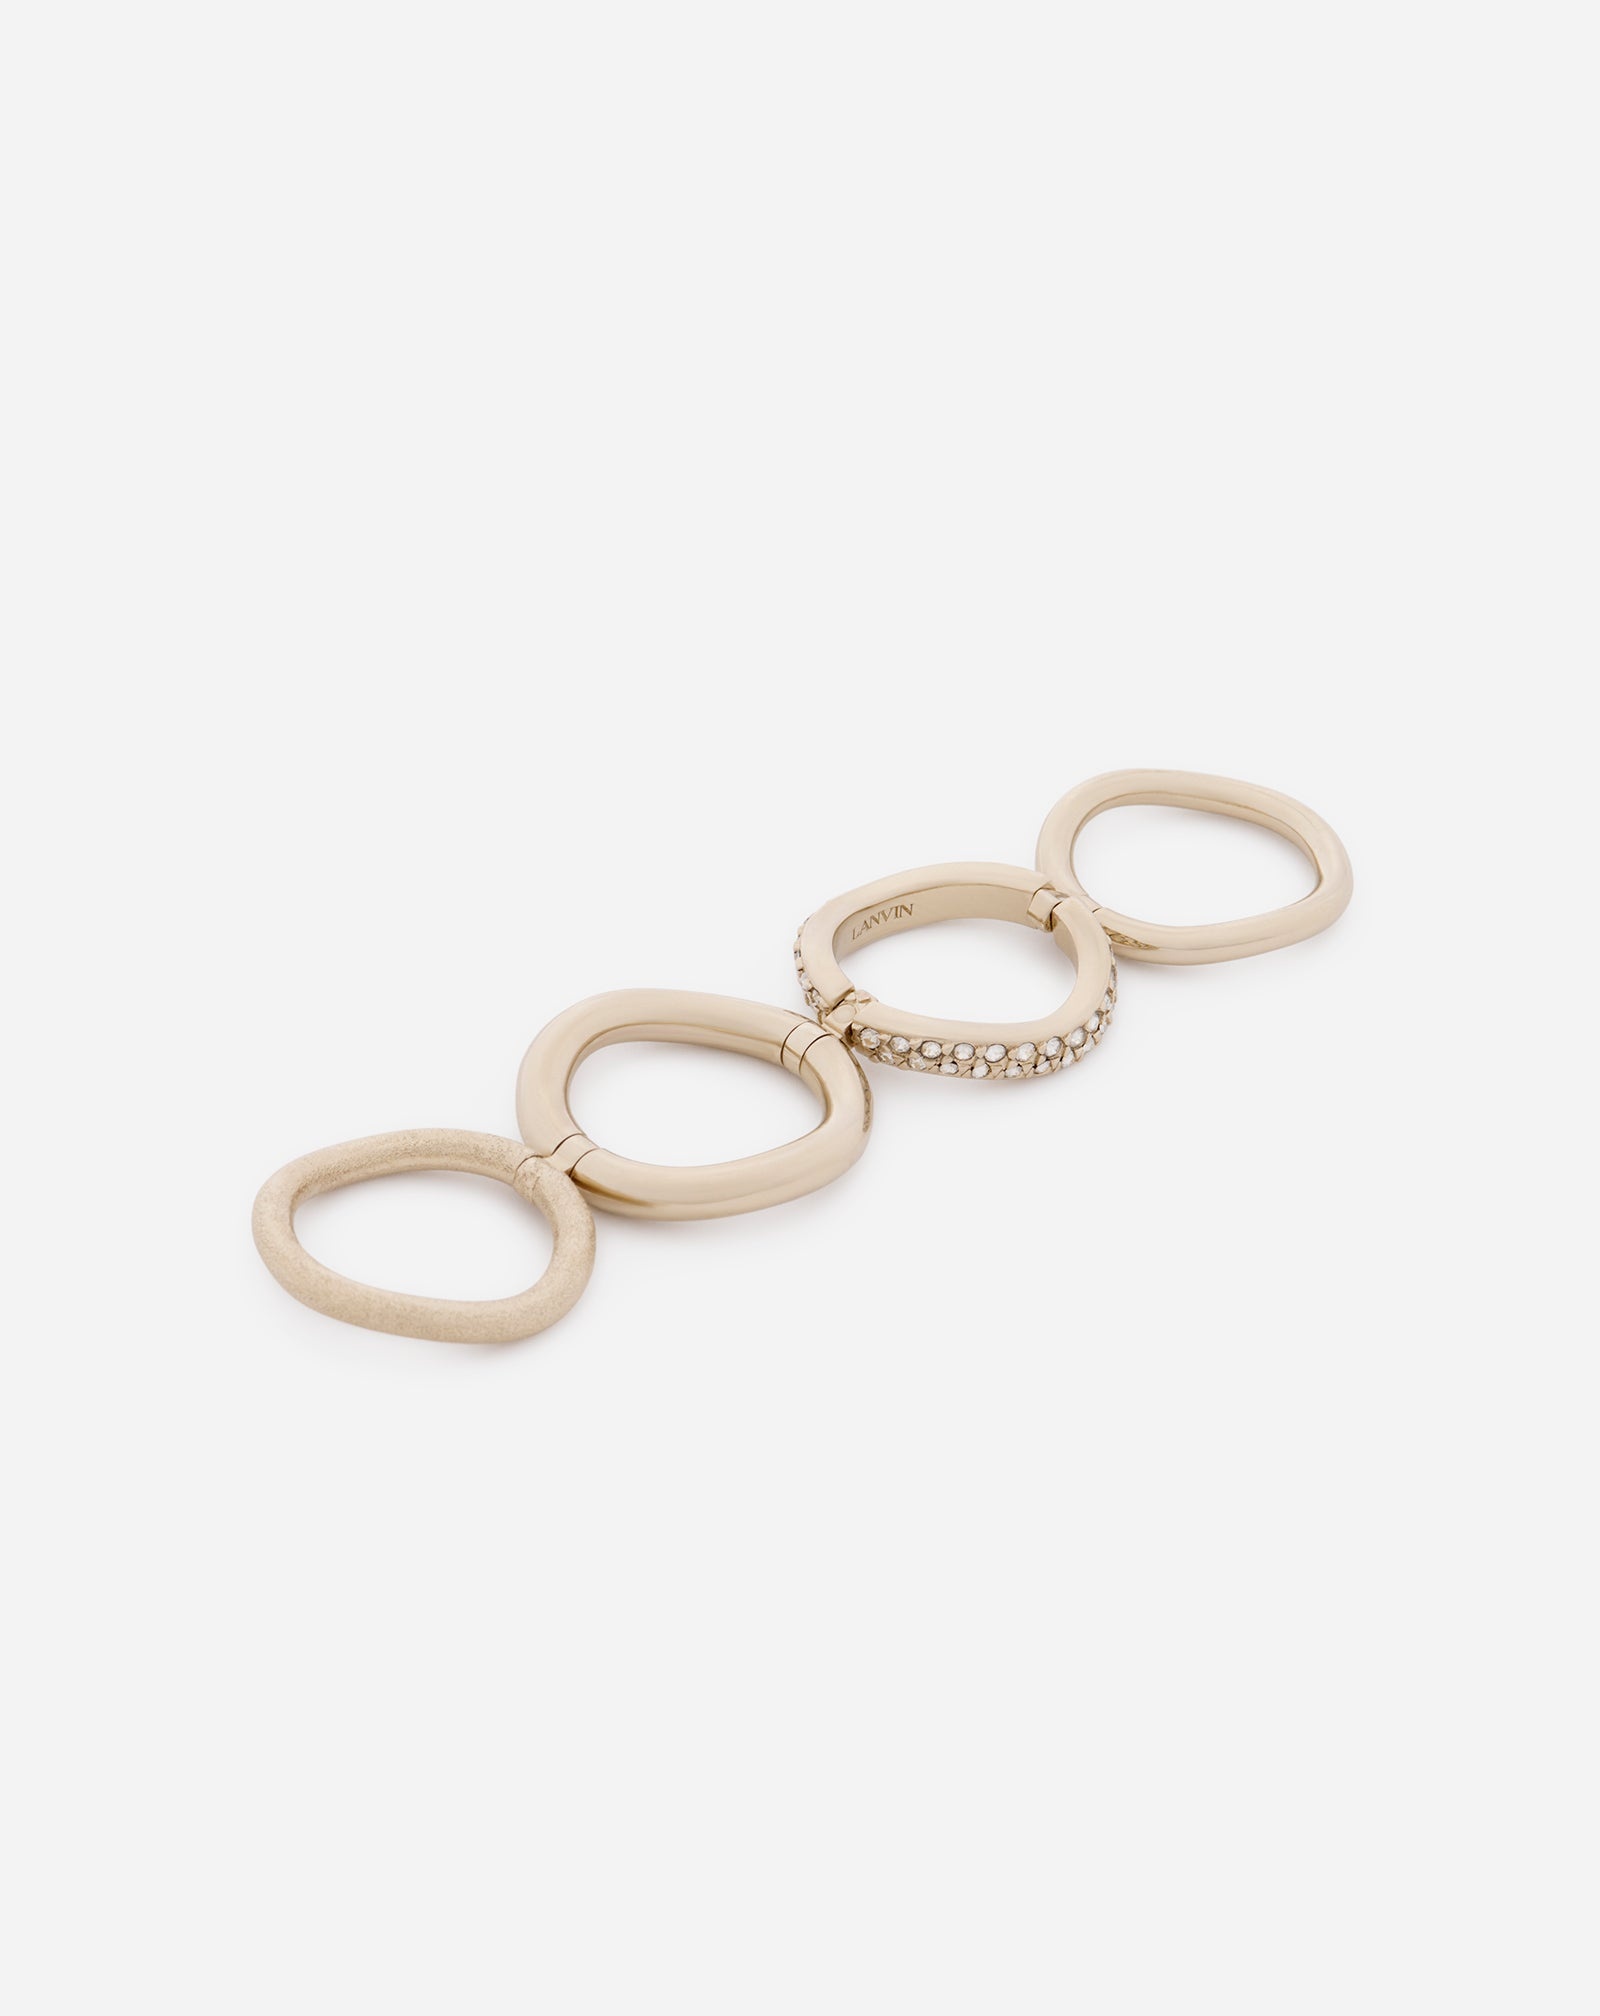 PARTITION BY LANVIN RING - 7